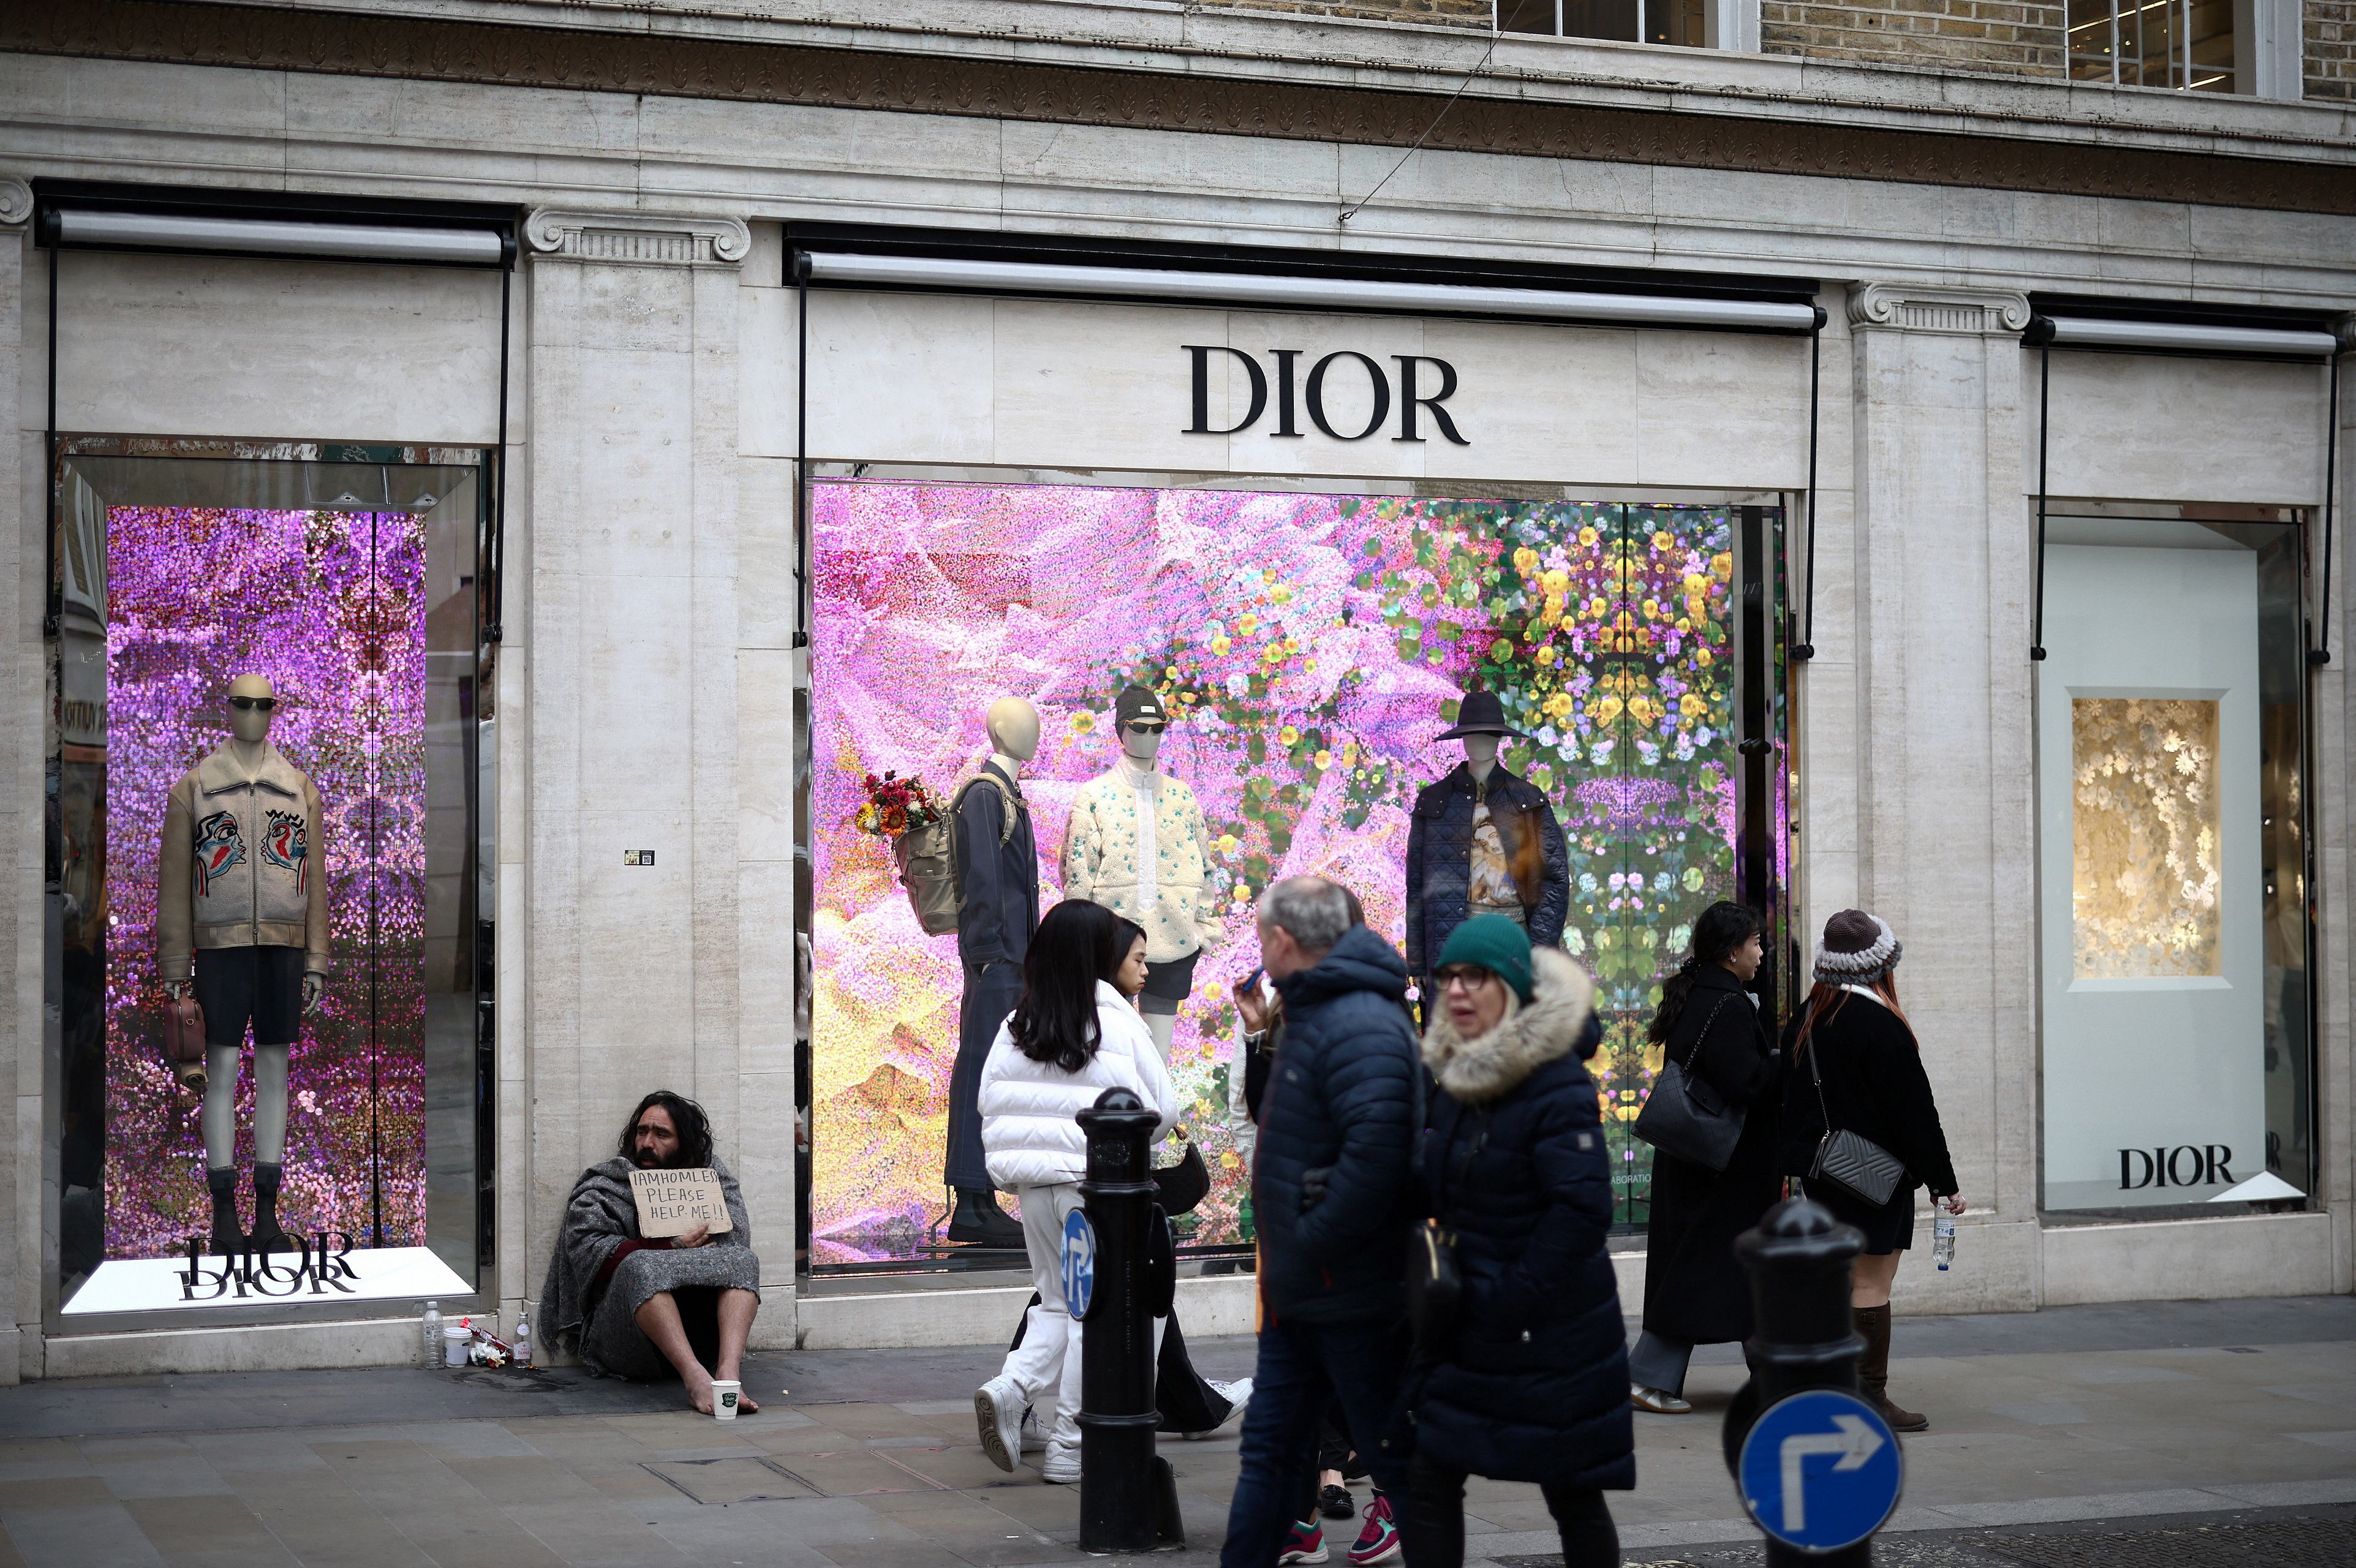 London Is Losing Its Crown as a Luxury Shopping Destination - WSJ